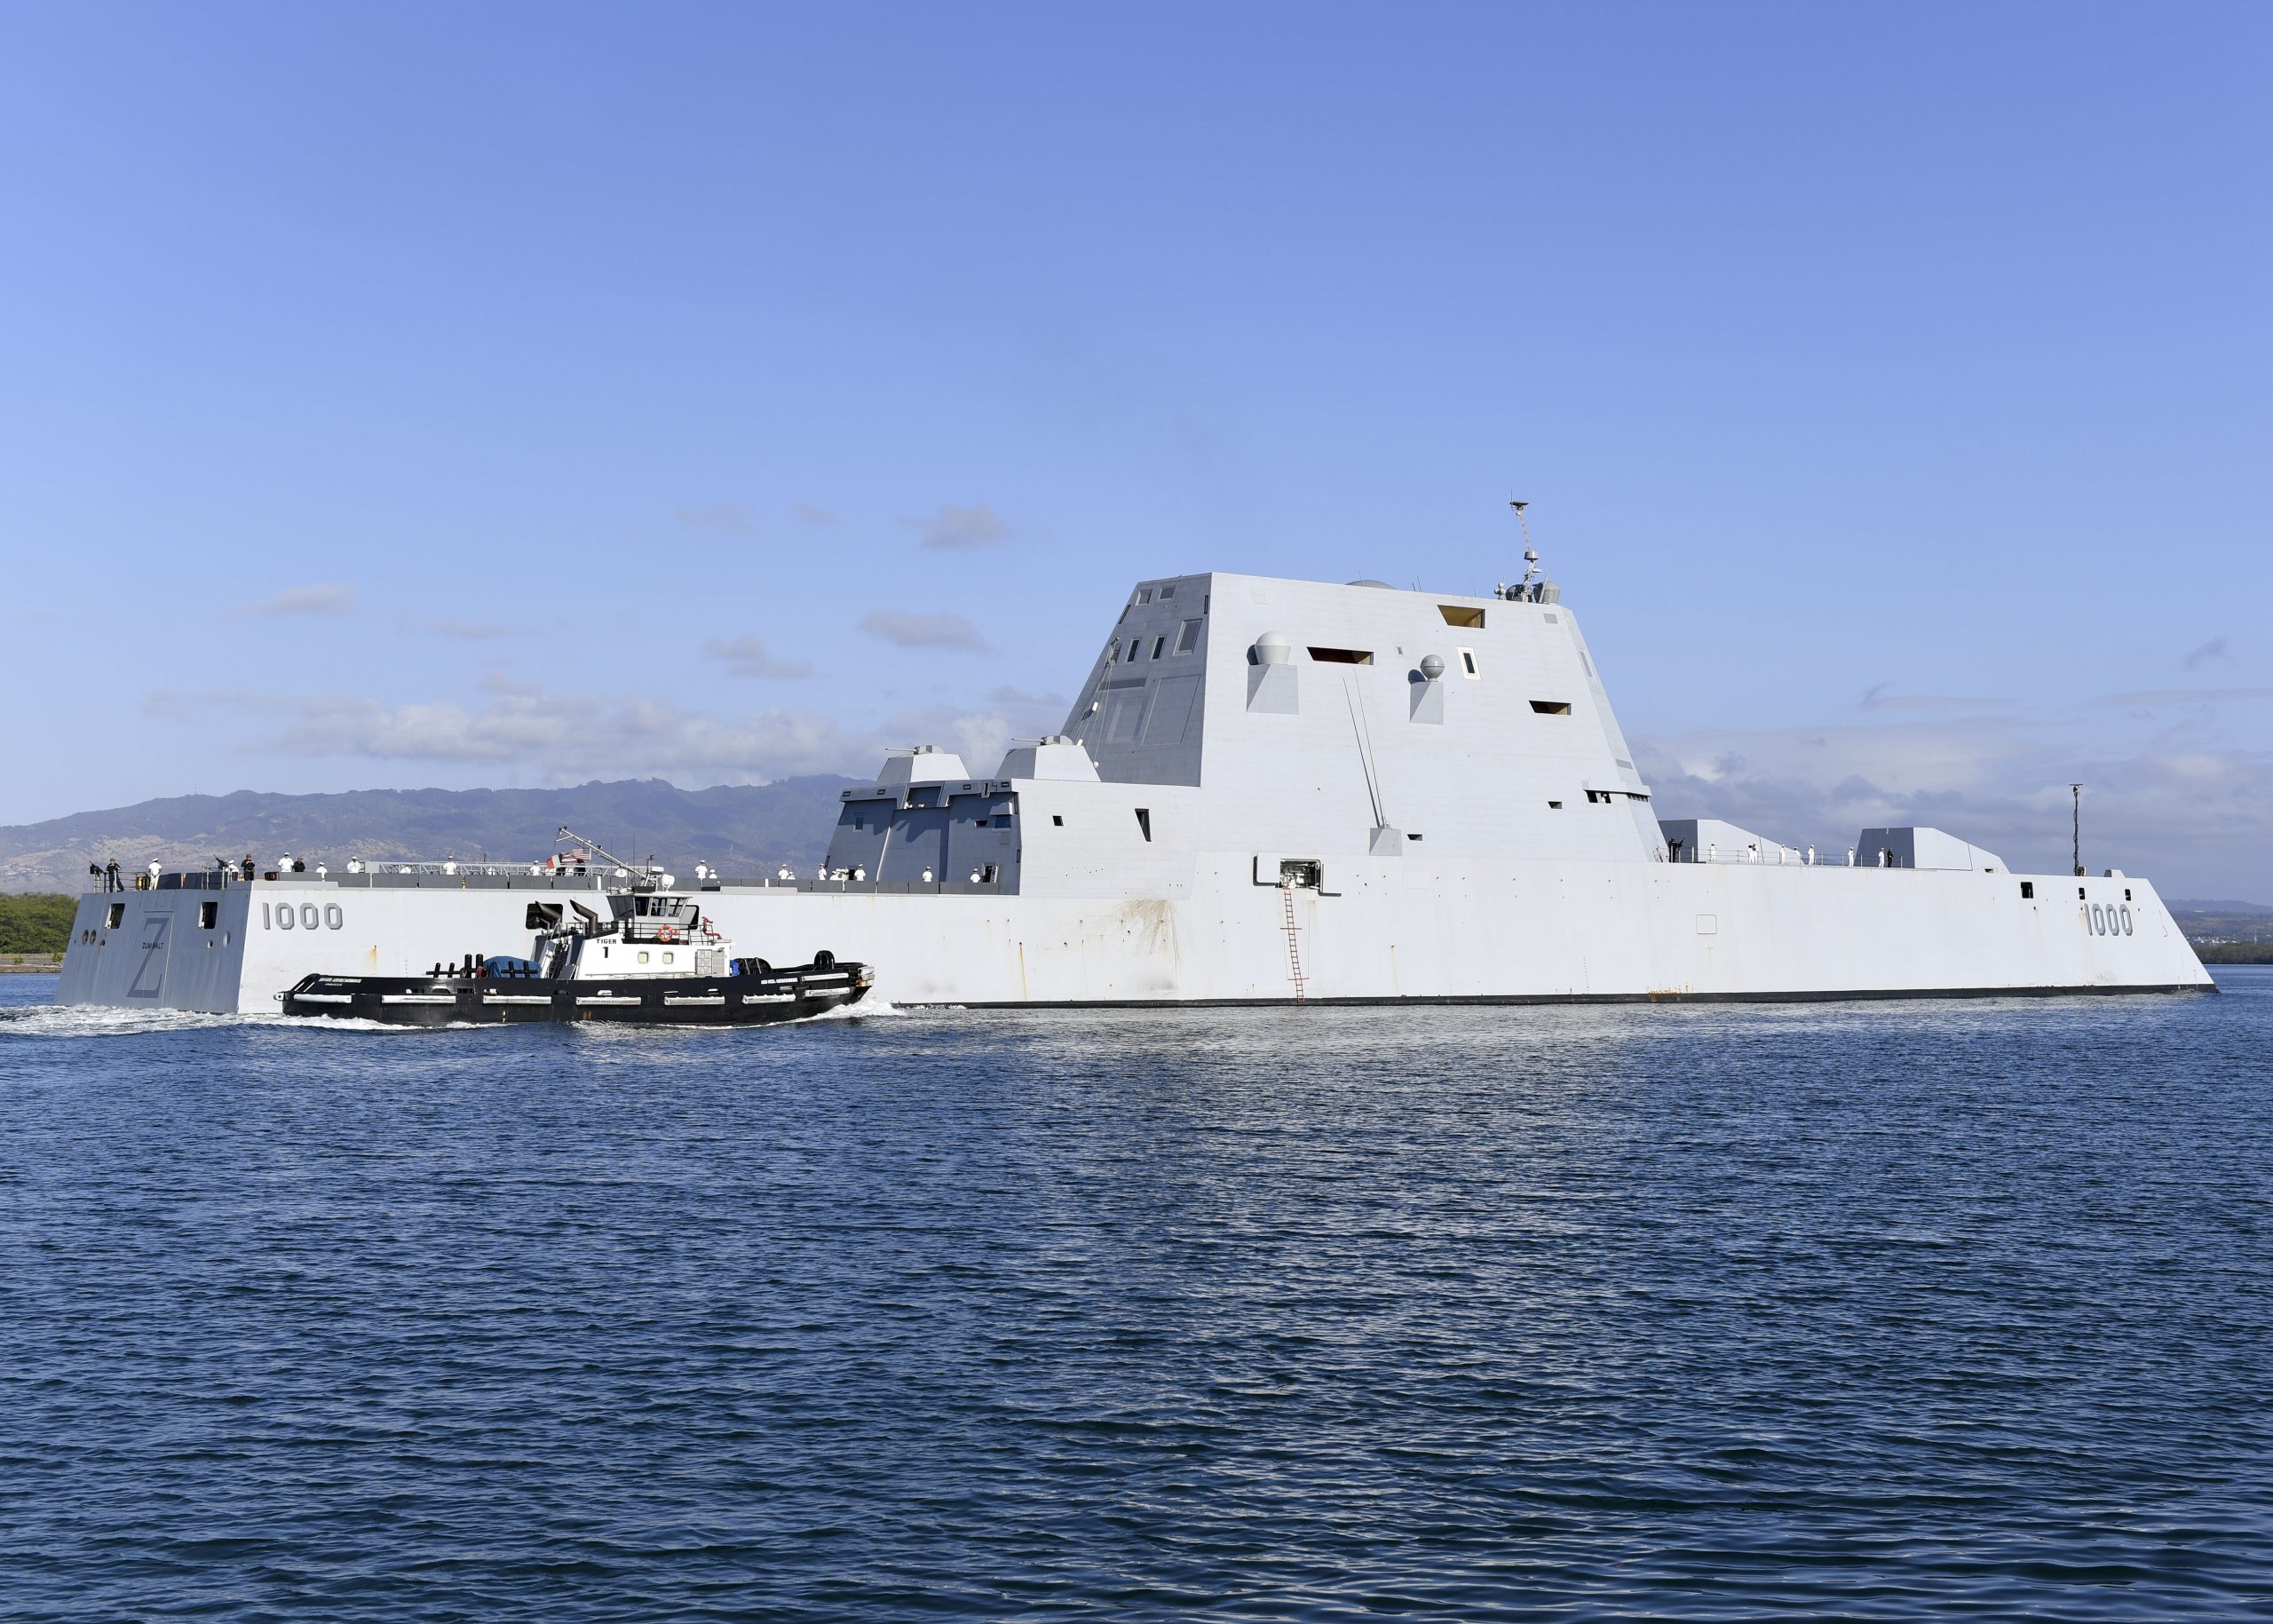 190402-N-KR702-1029 PEARL HARBOR (April 2, 2019) Sailors man the rails aboard the guided-missile destroyer USS Zumwalt (DDG 1000) as the ship pulls into Joint Base Pearl Harbor-Hickam. Zumwalt-class destroyers provide the Navy with agile military advantages at sea and with ground forces ashore. (U.S. Navy Photo by Mass Communication Specialist 1st Class Holly L. Herline)